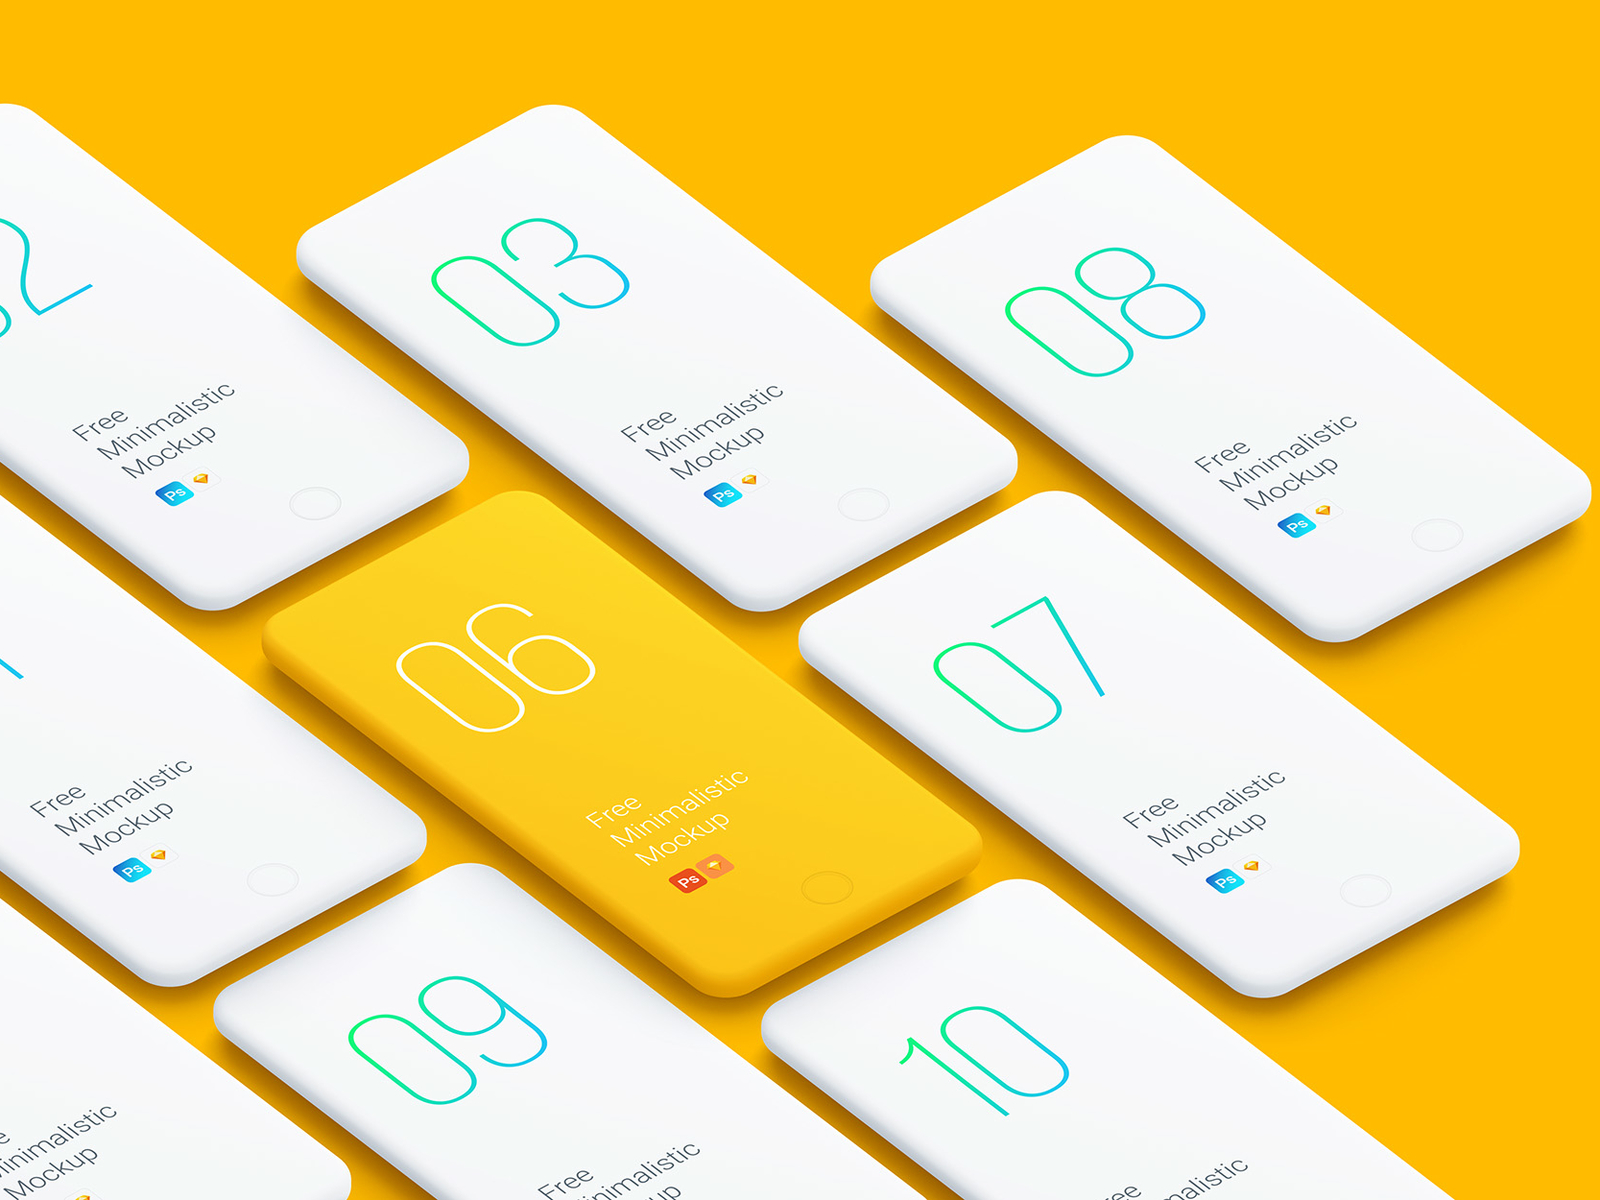 Download Free Minimalistic Phone Mockups by dazzler software on ...